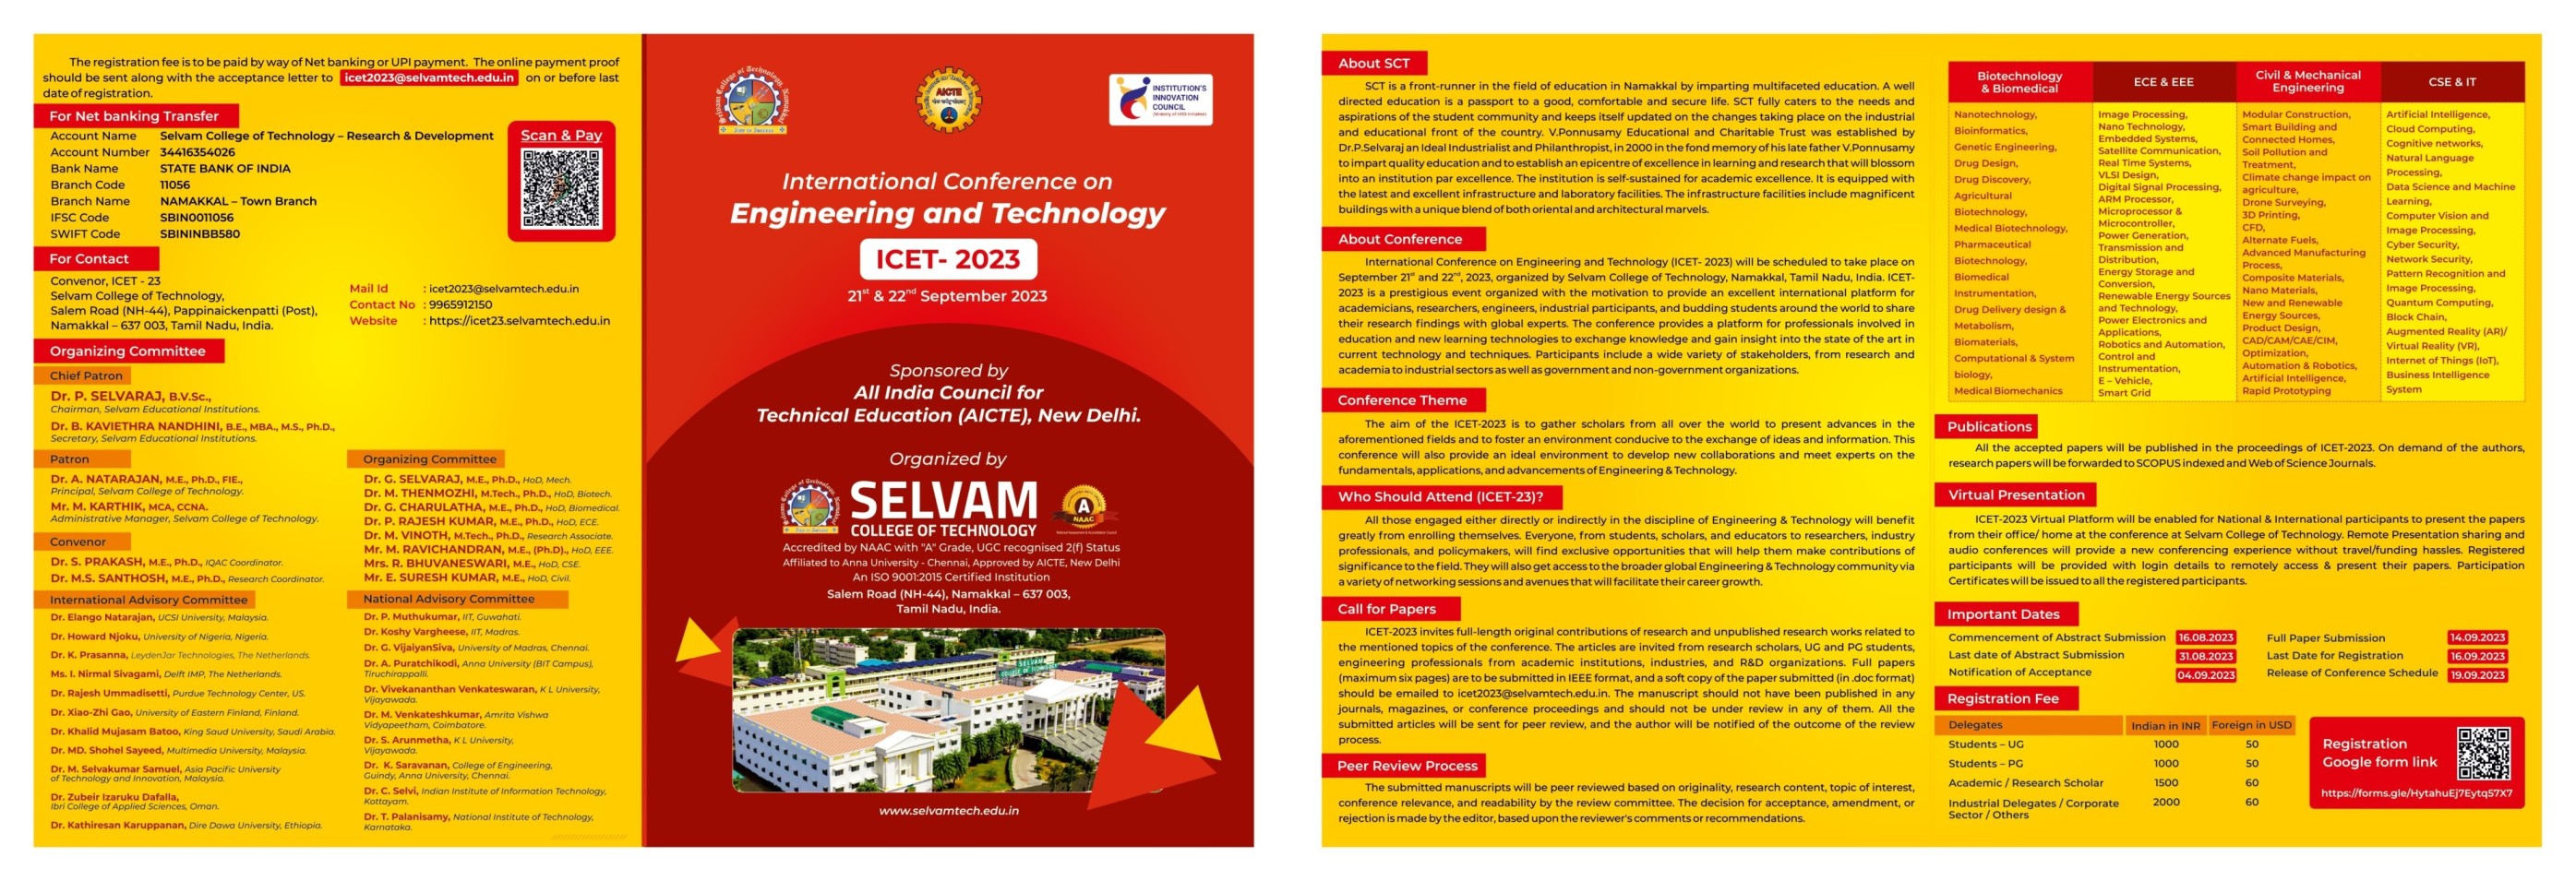 International Conference on Engineering and Technology ICET 2023